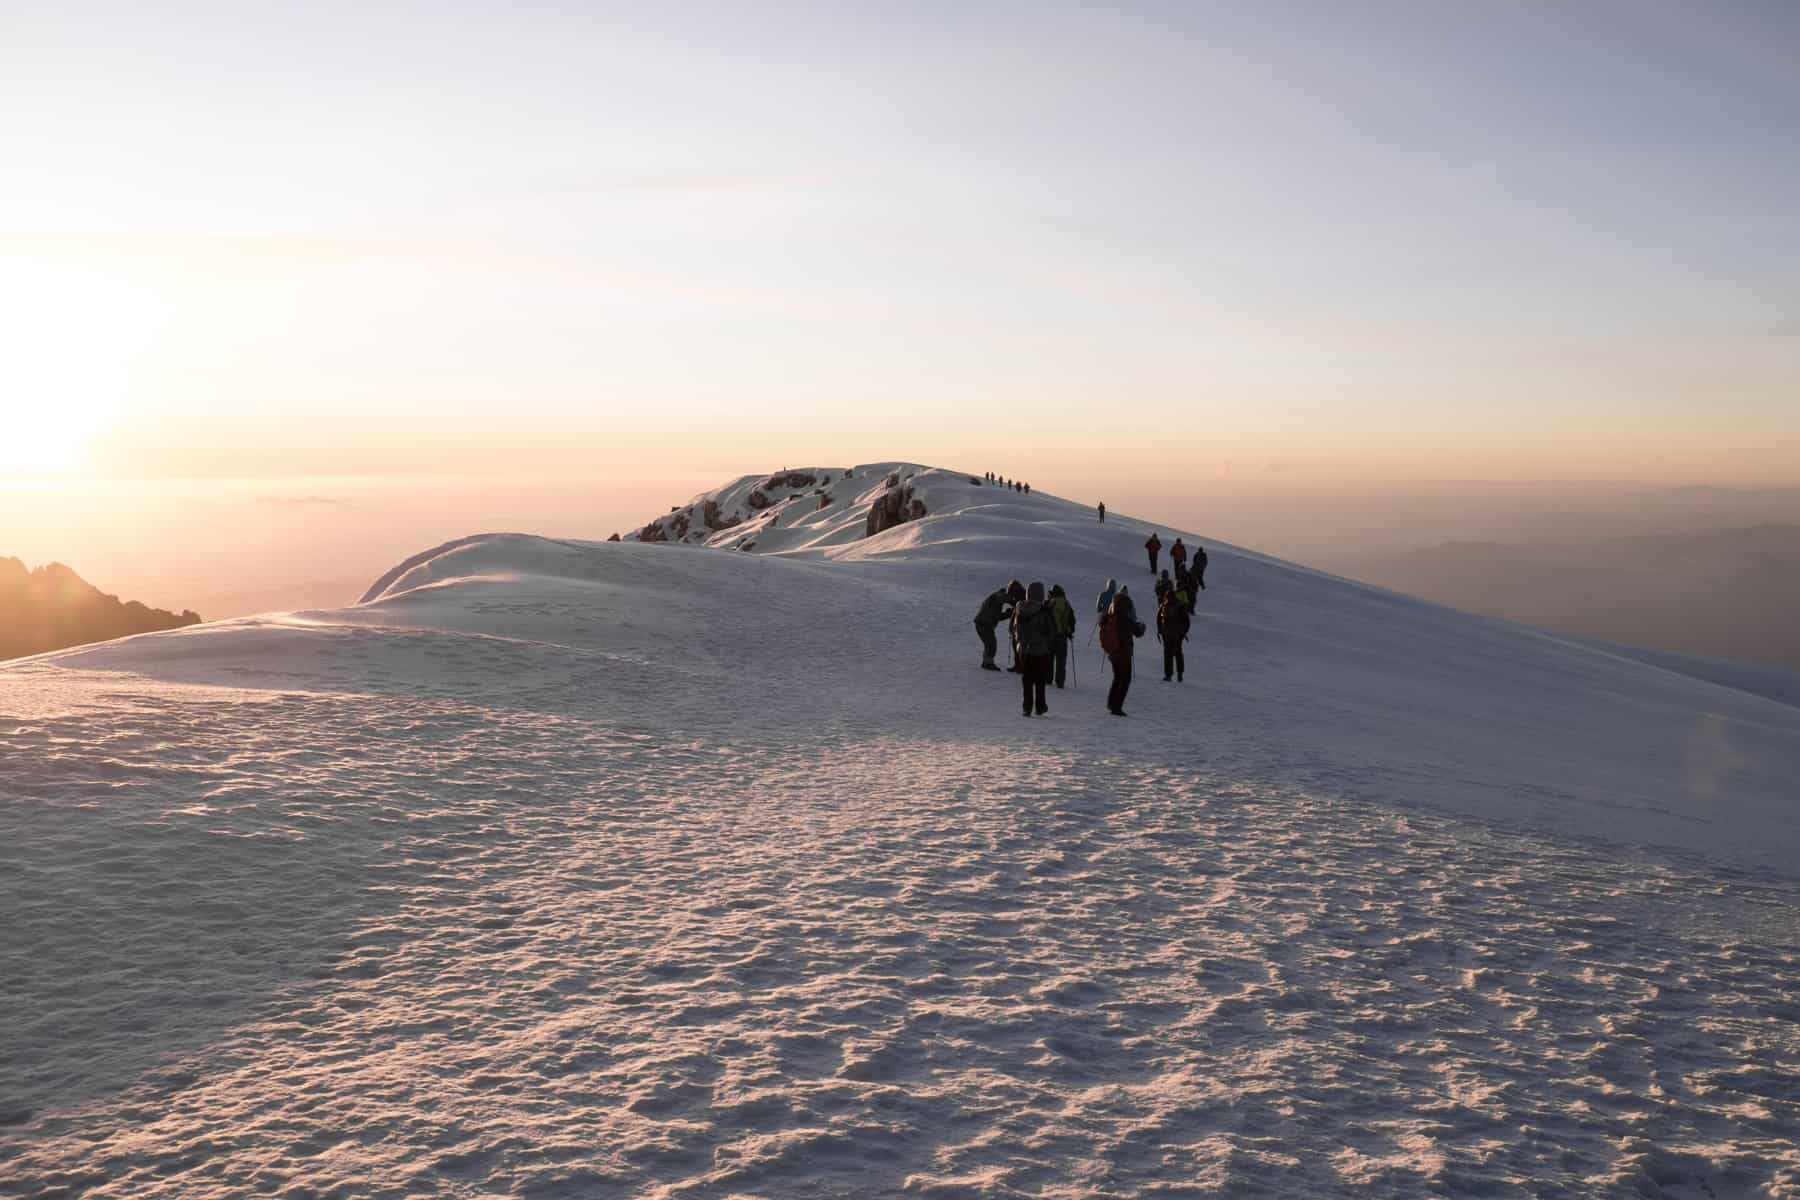 A small line of people walk across a long mountain crater rim covered in snow to a backdrop of light yellow sunrise - part of Kilimanjaro Uhuru Peak.